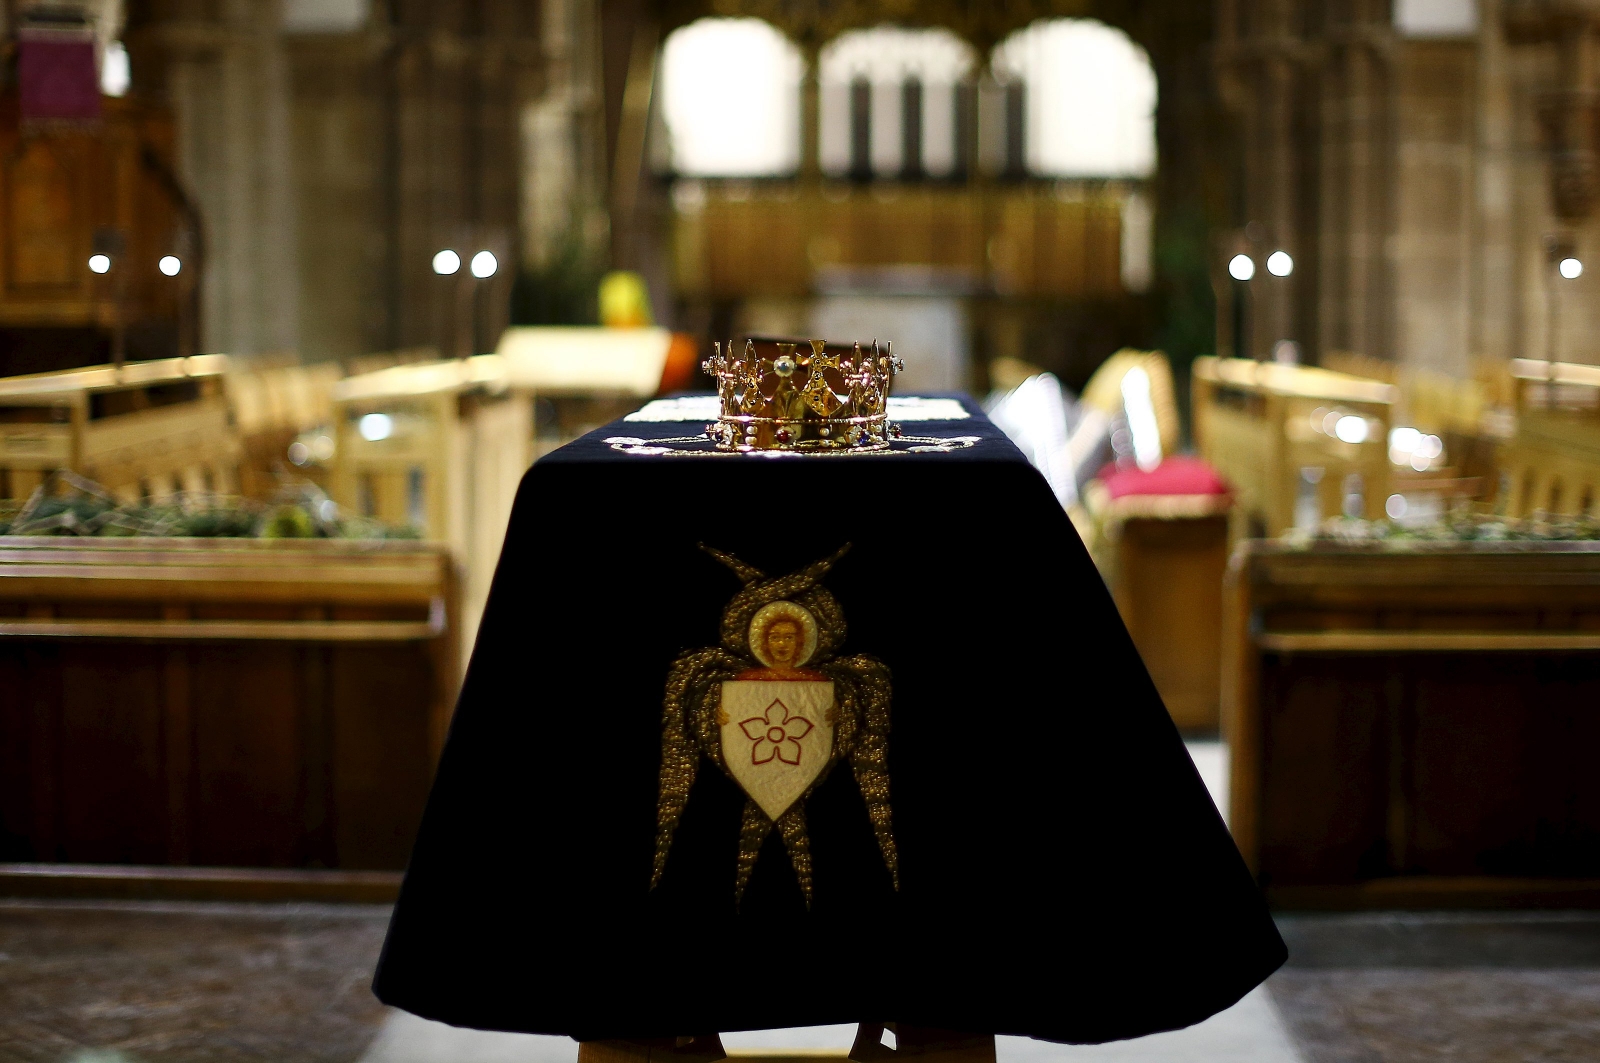 King Richard III nears resting place after 530 years